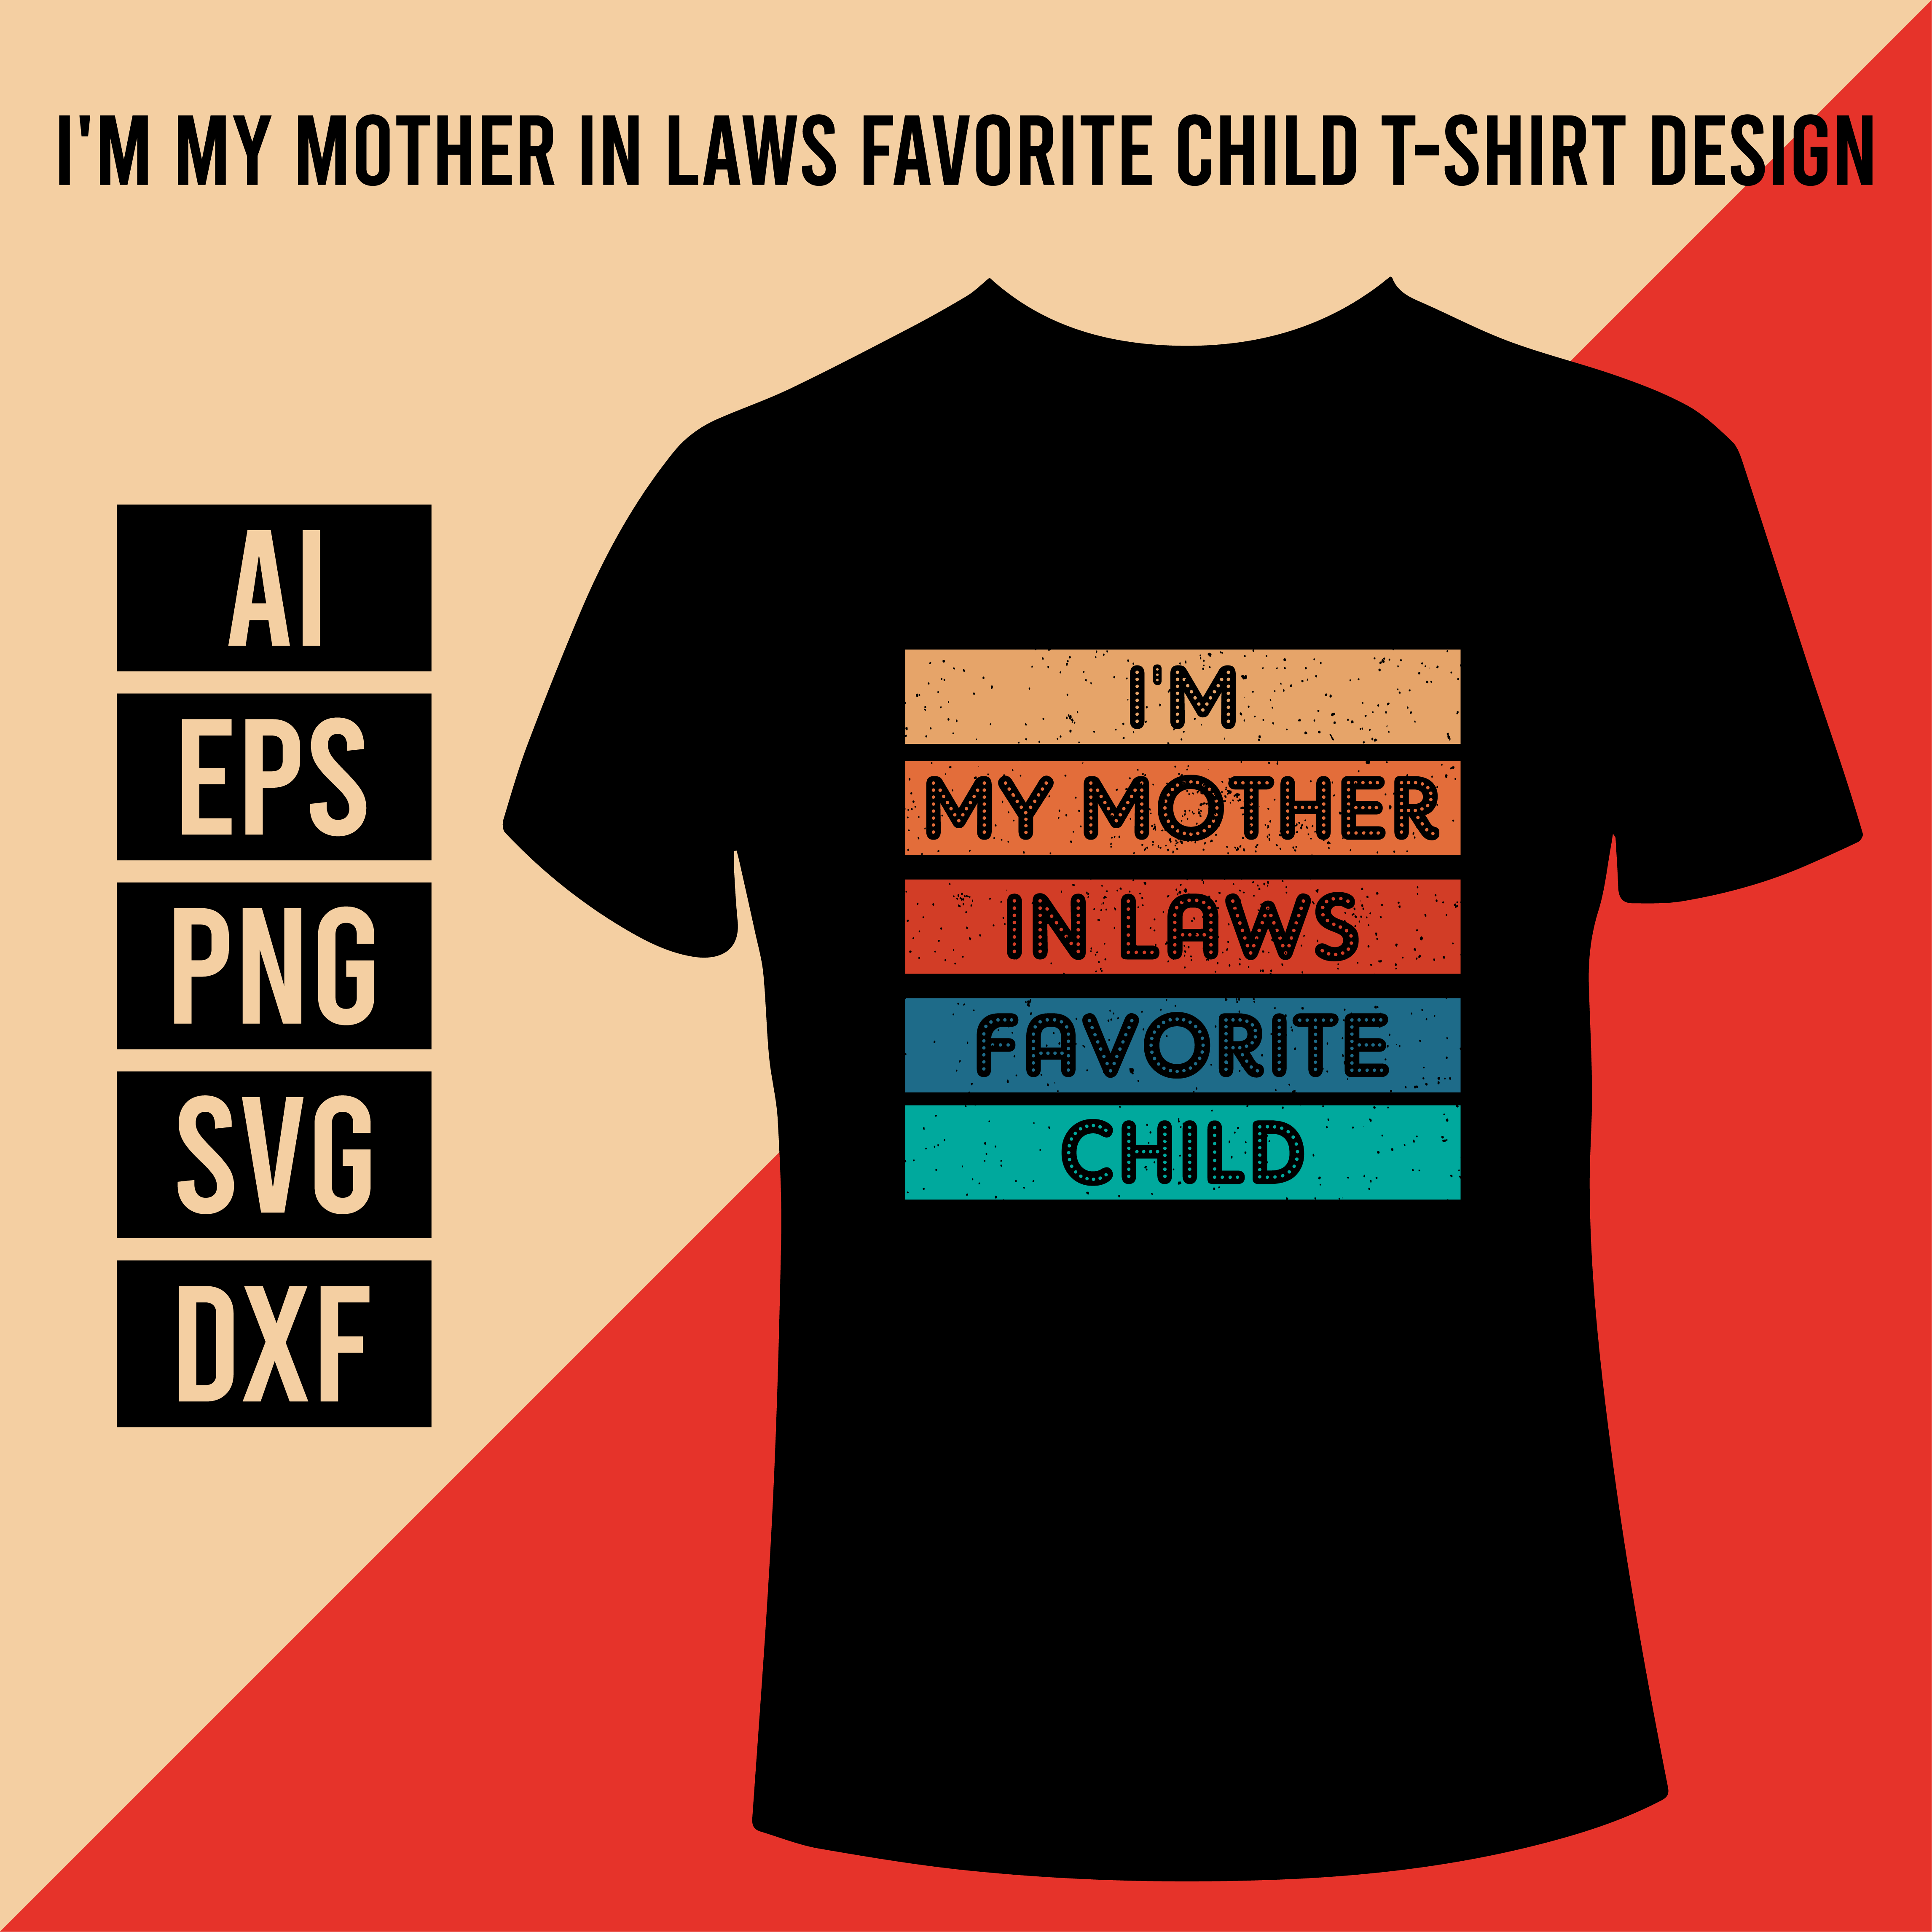 I'm My Mother In Laws Favorite Child T-Shirt Design cover image.